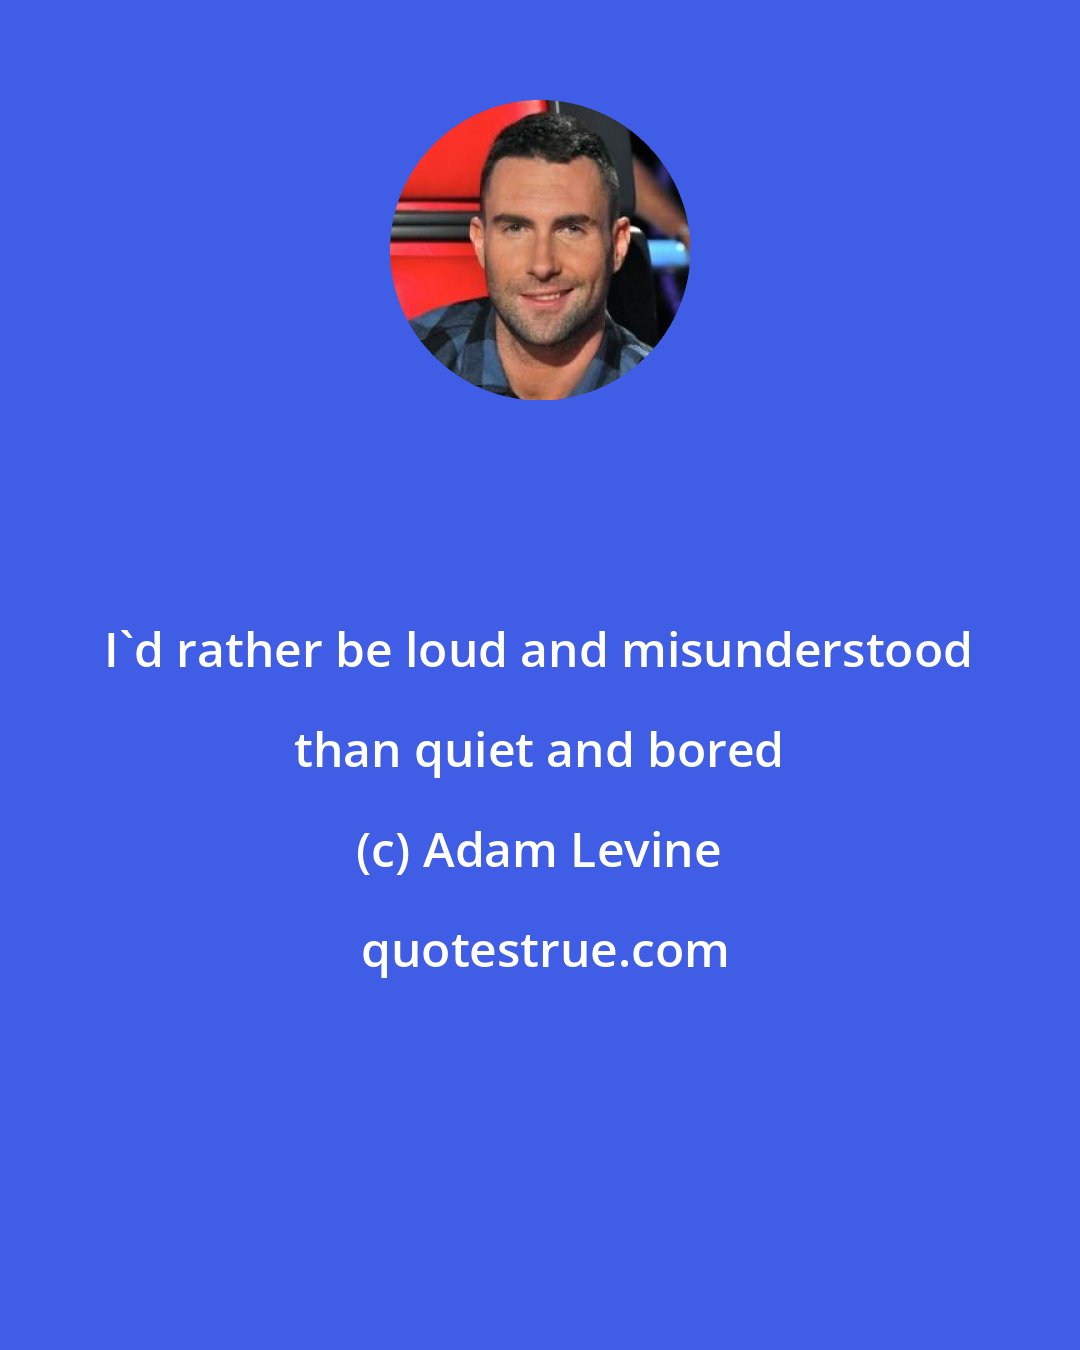 Adam Levine: I'd rather be loud and misunderstood than quiet and bored